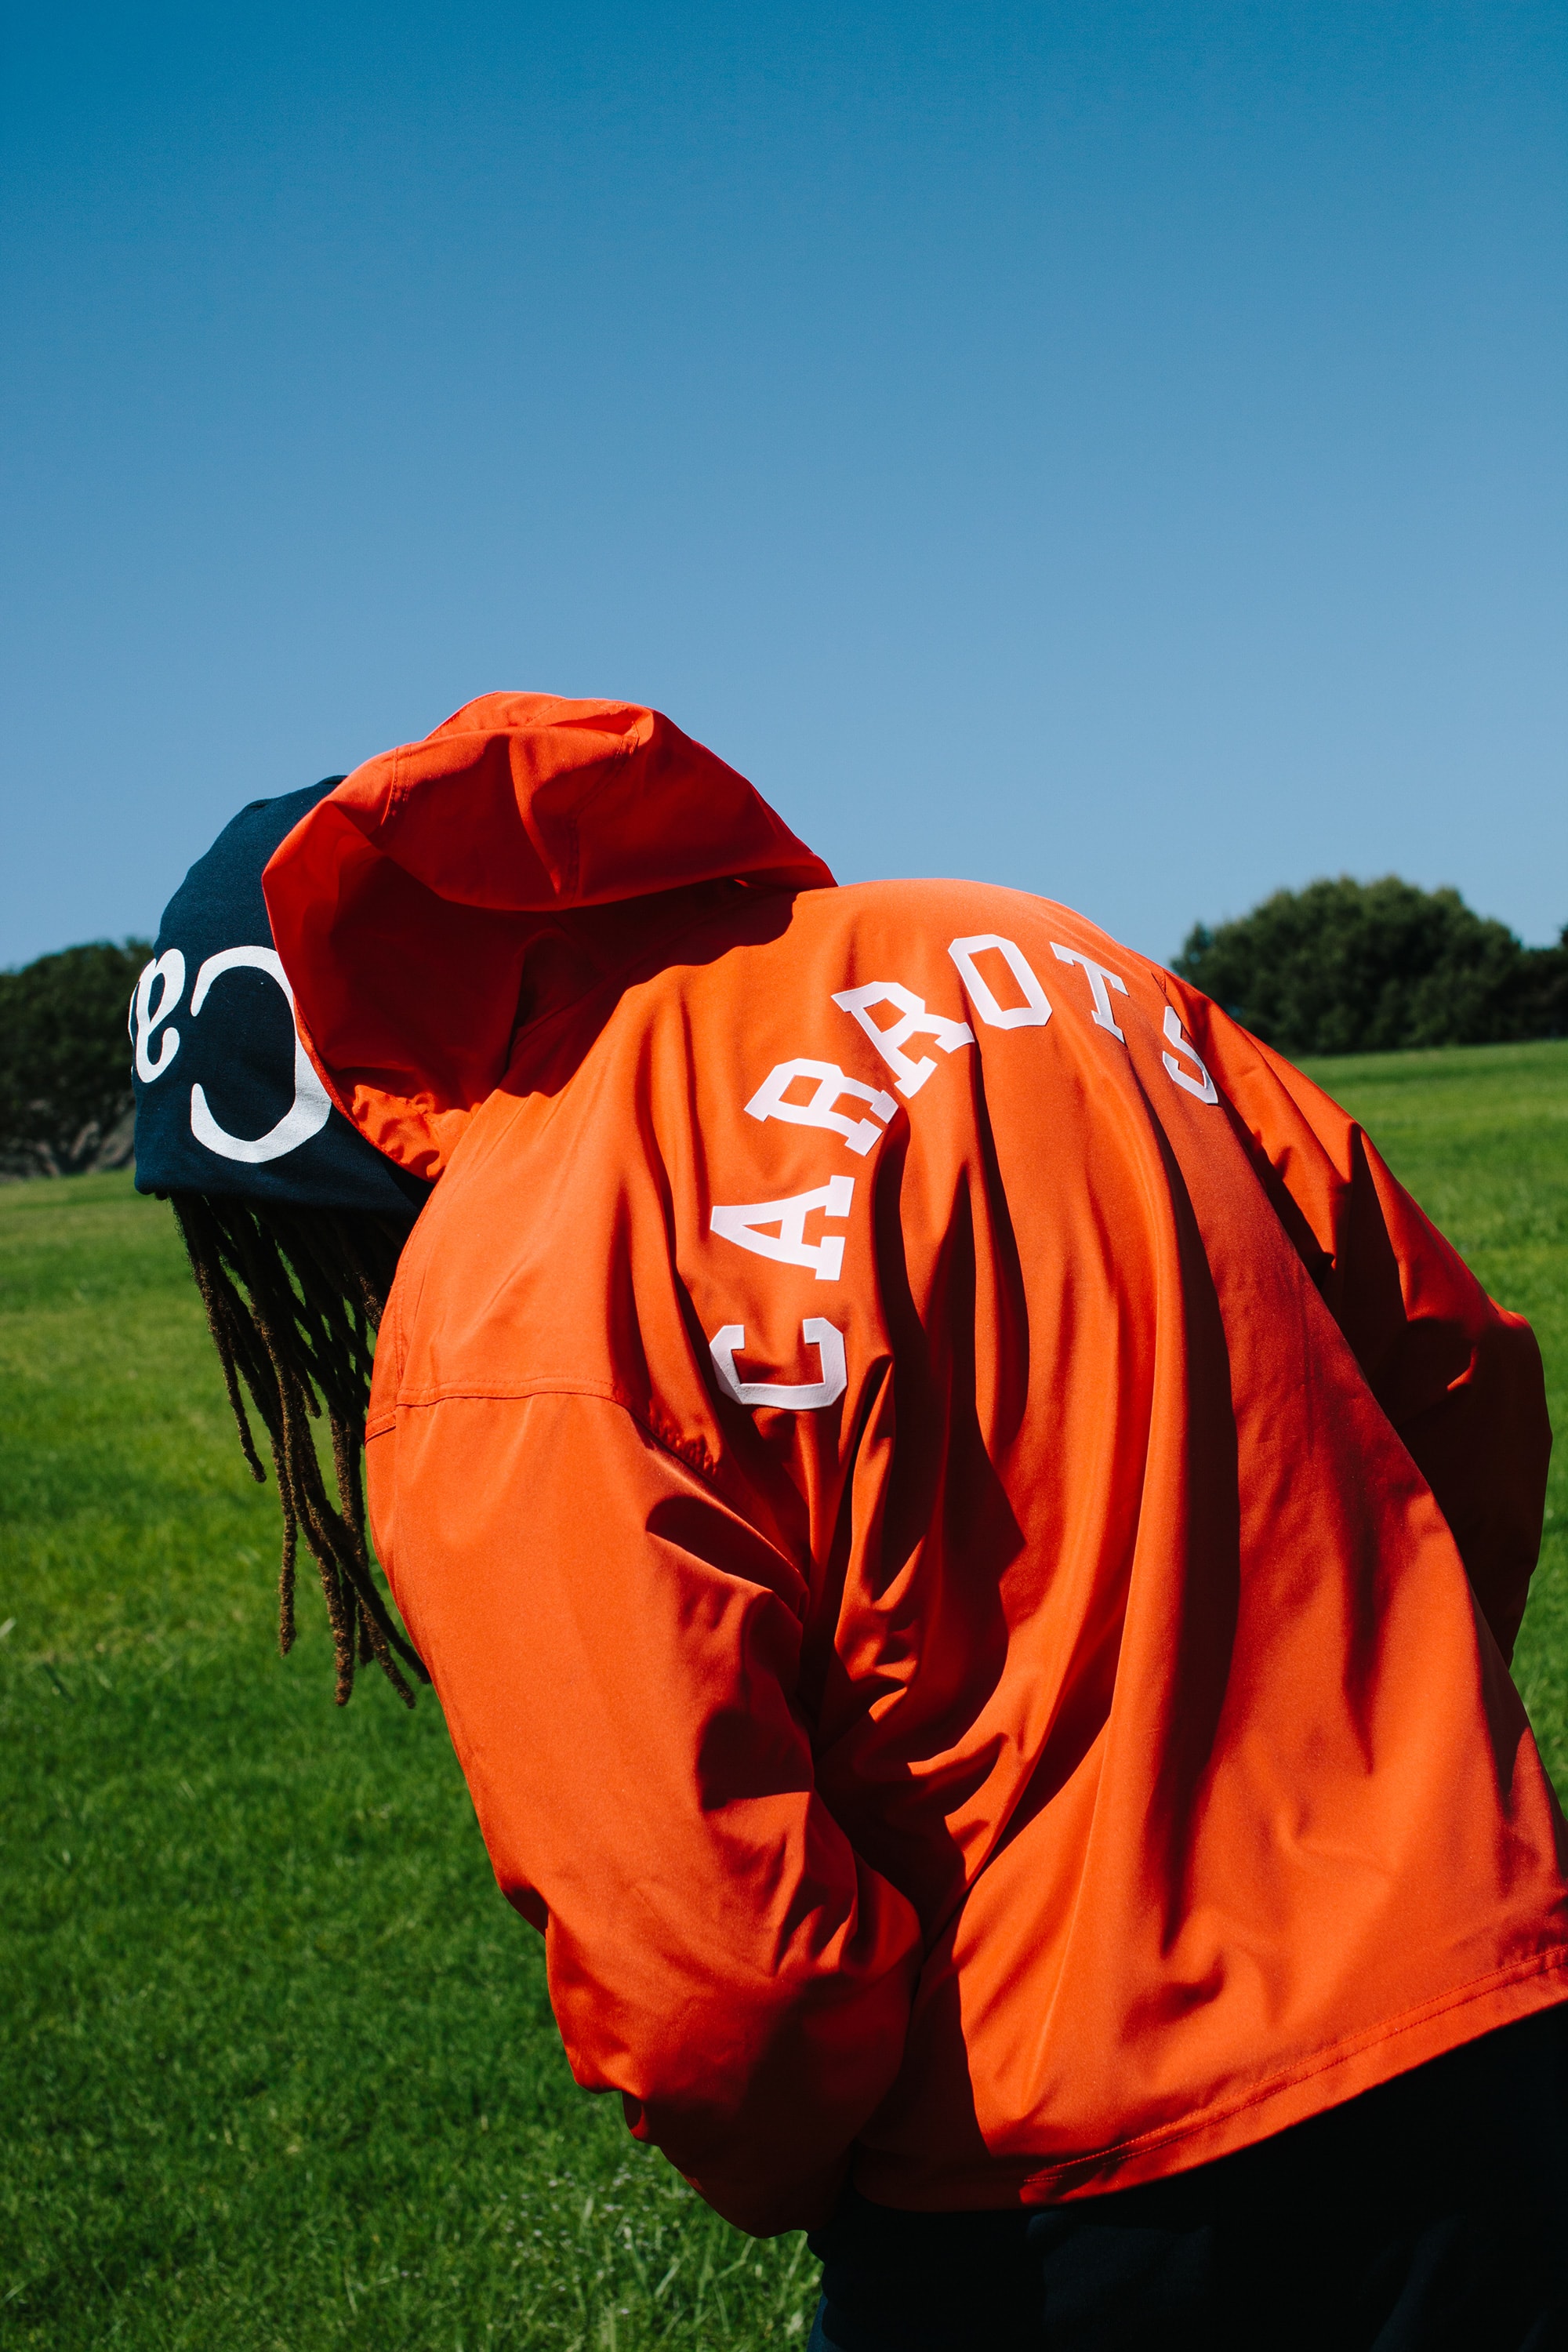 Carrots by Anwar Carrots Champion limited edition capsule collection lookbook 2018 june fashion